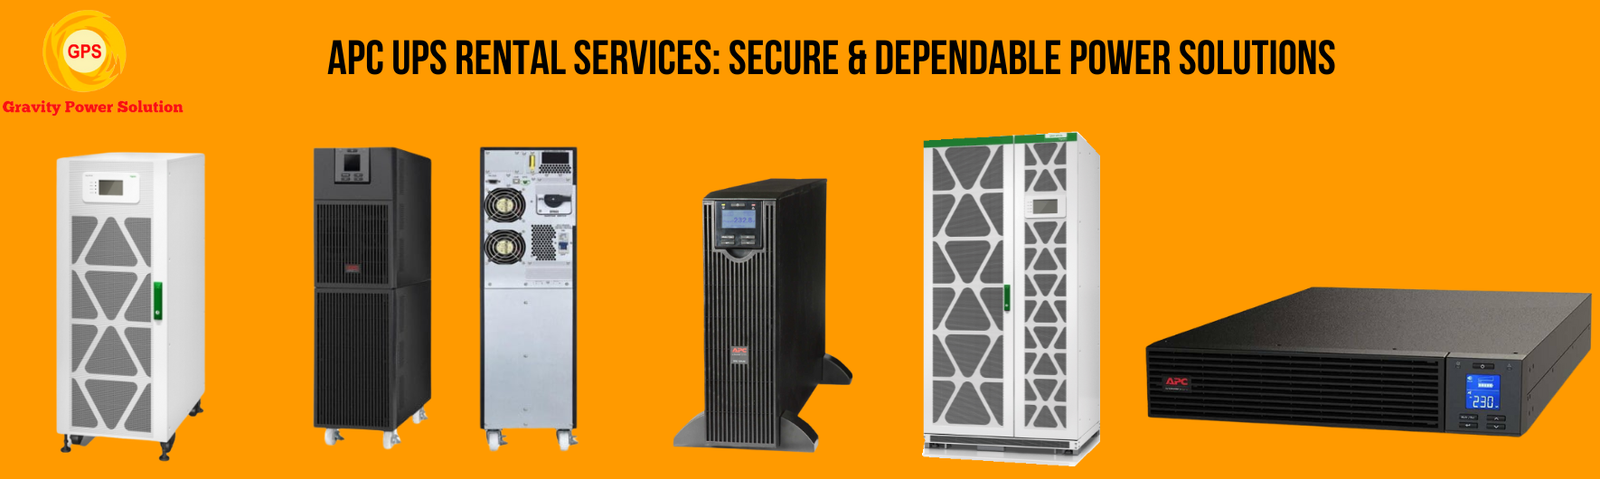 APC UPS Rental Services Secure & Dependable Power Solutions